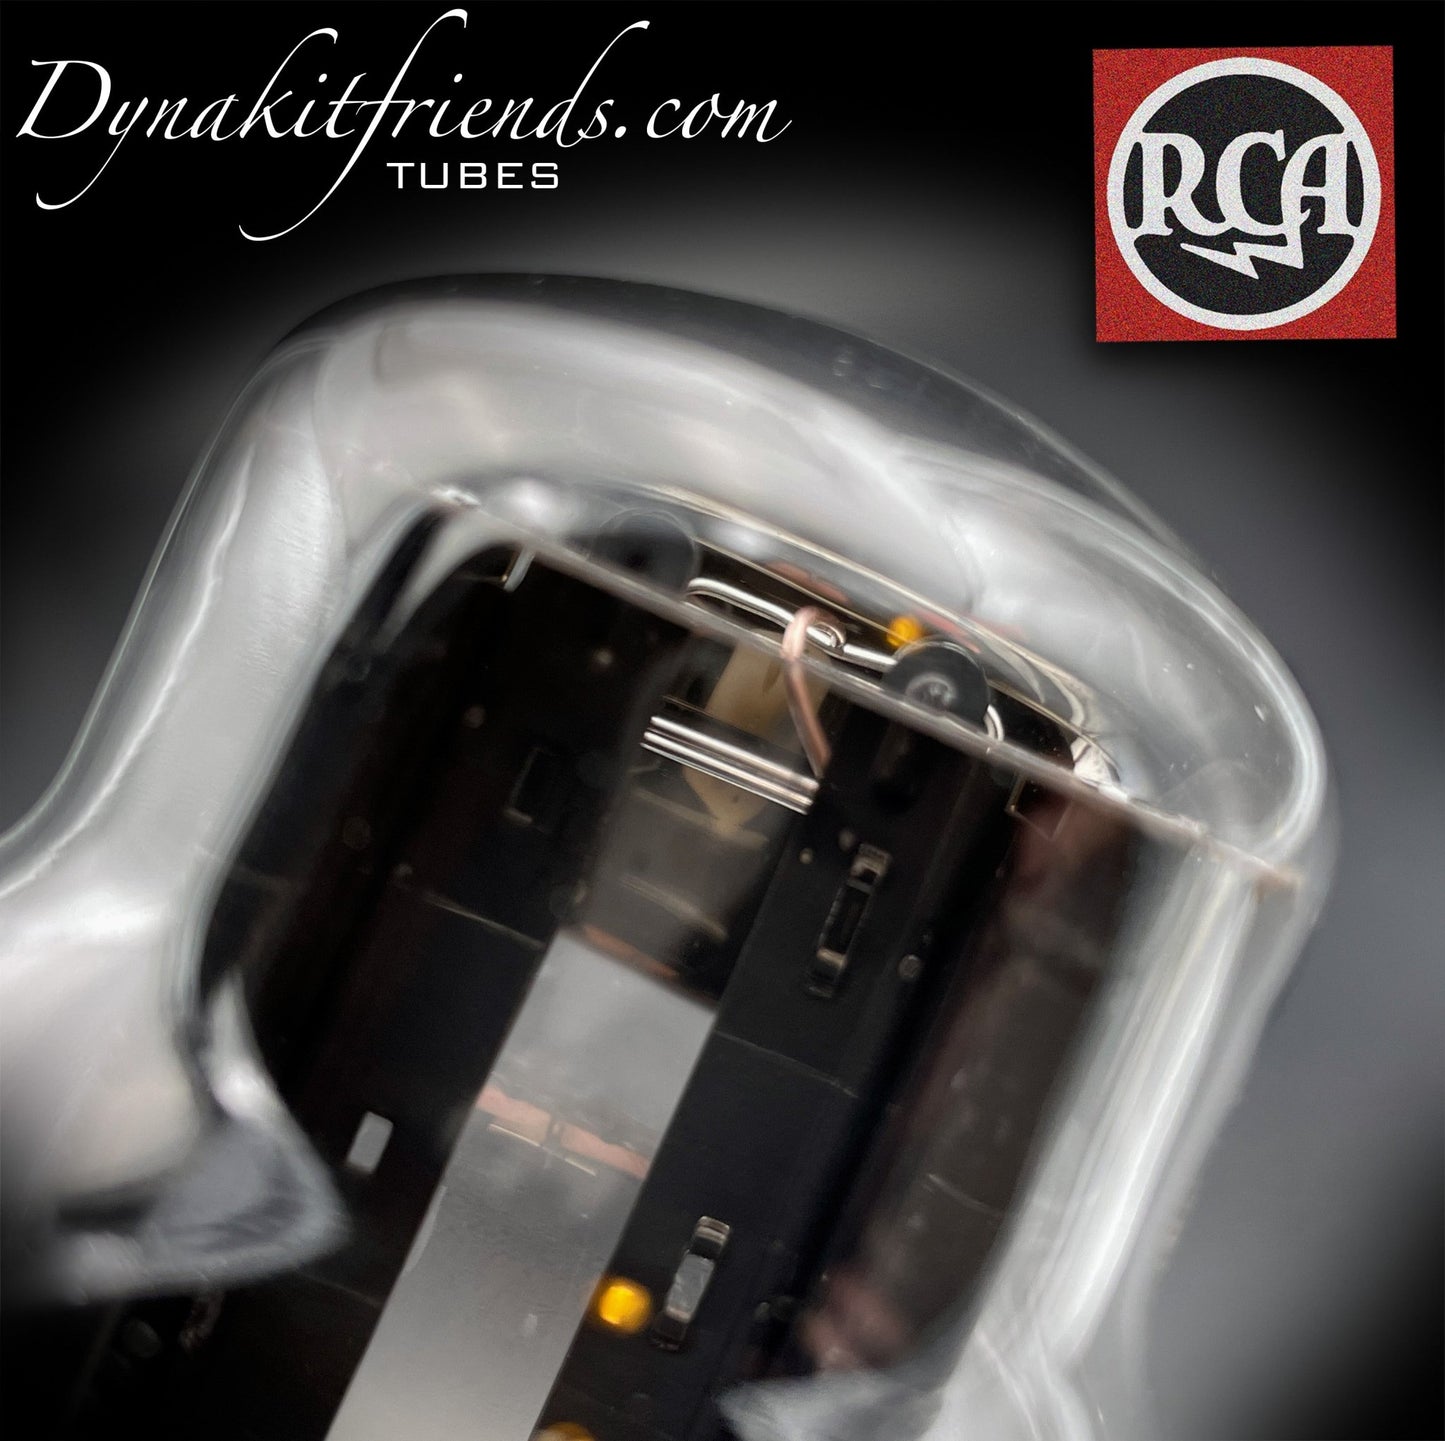 5Z3 ( VT-145 ) RCA Black Plates Top [] Getter Tube Rectifier Made in USA - Vacuum Tubes Treasures